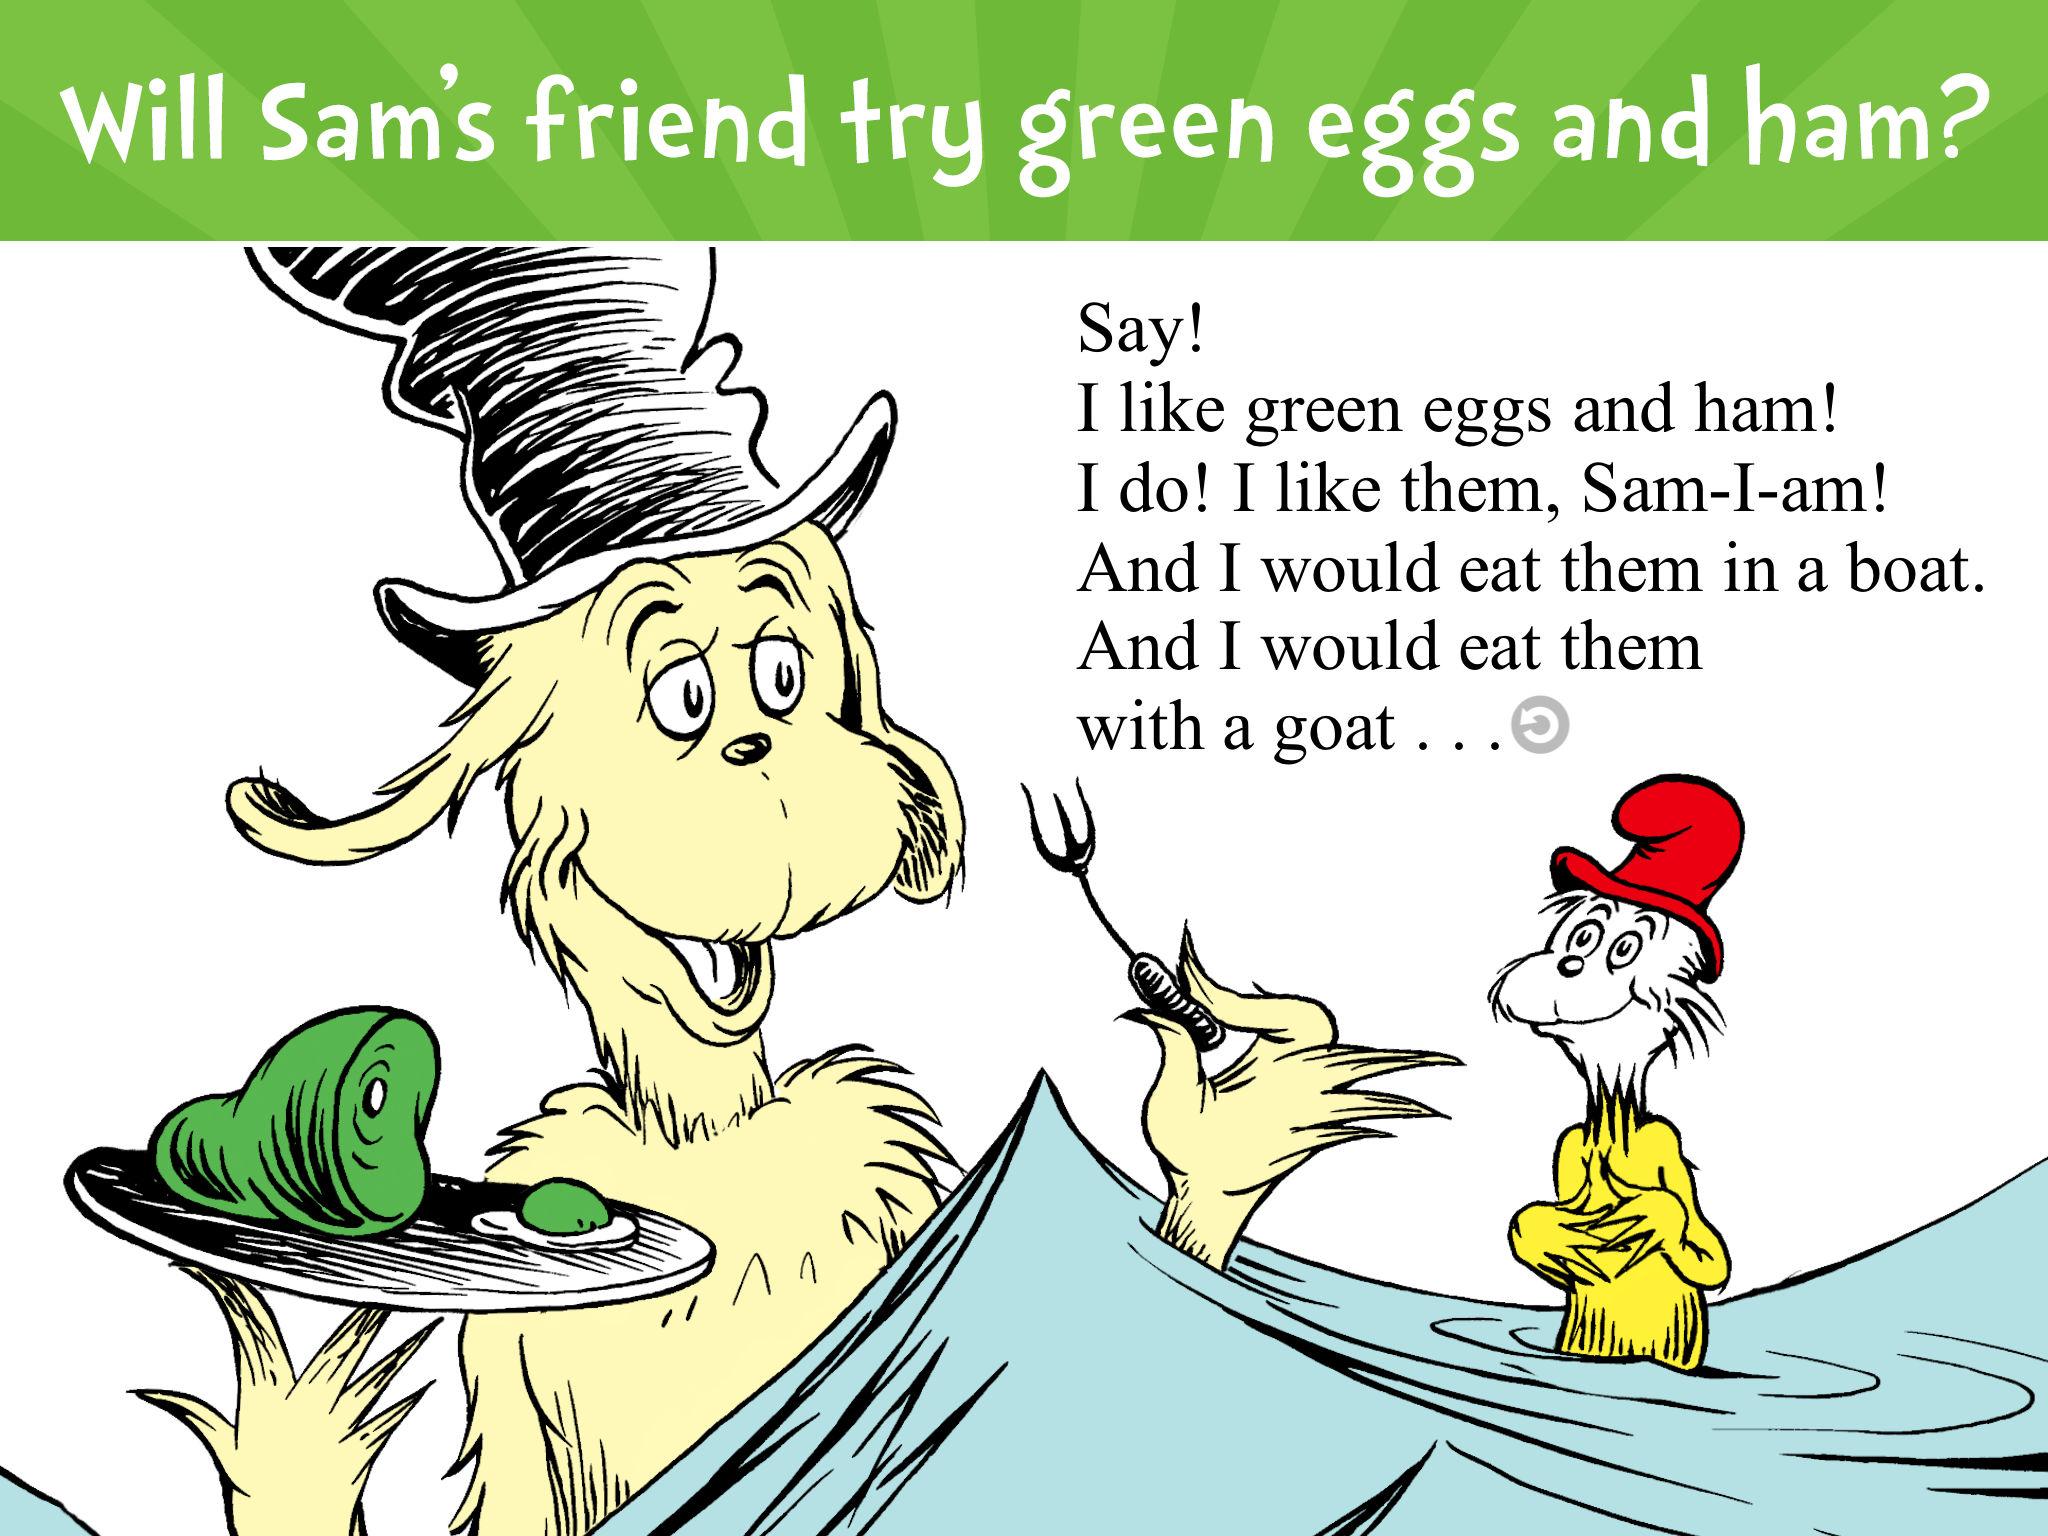 Green Eggs and Ham App Ranking and Store Data